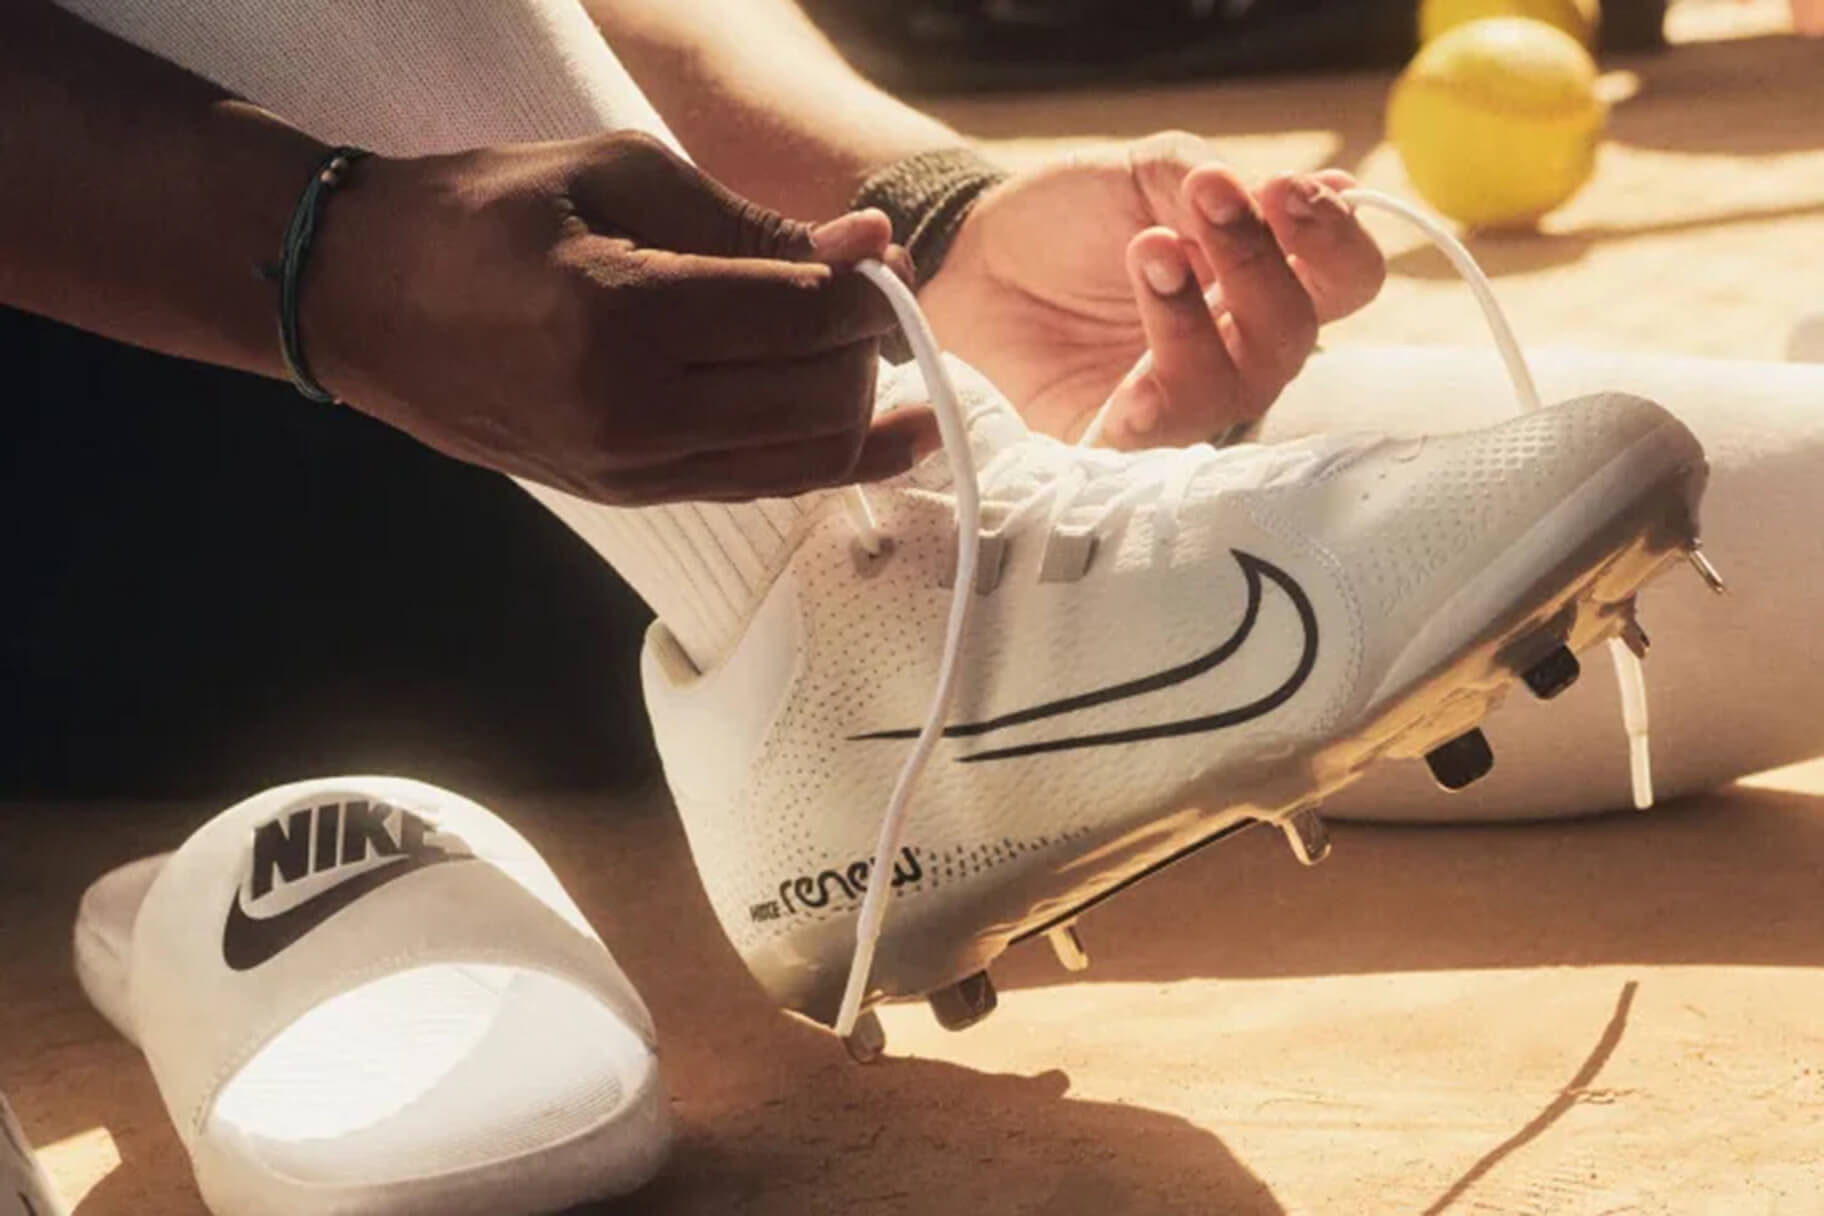 Check Out the Best Softball Boots by Nike